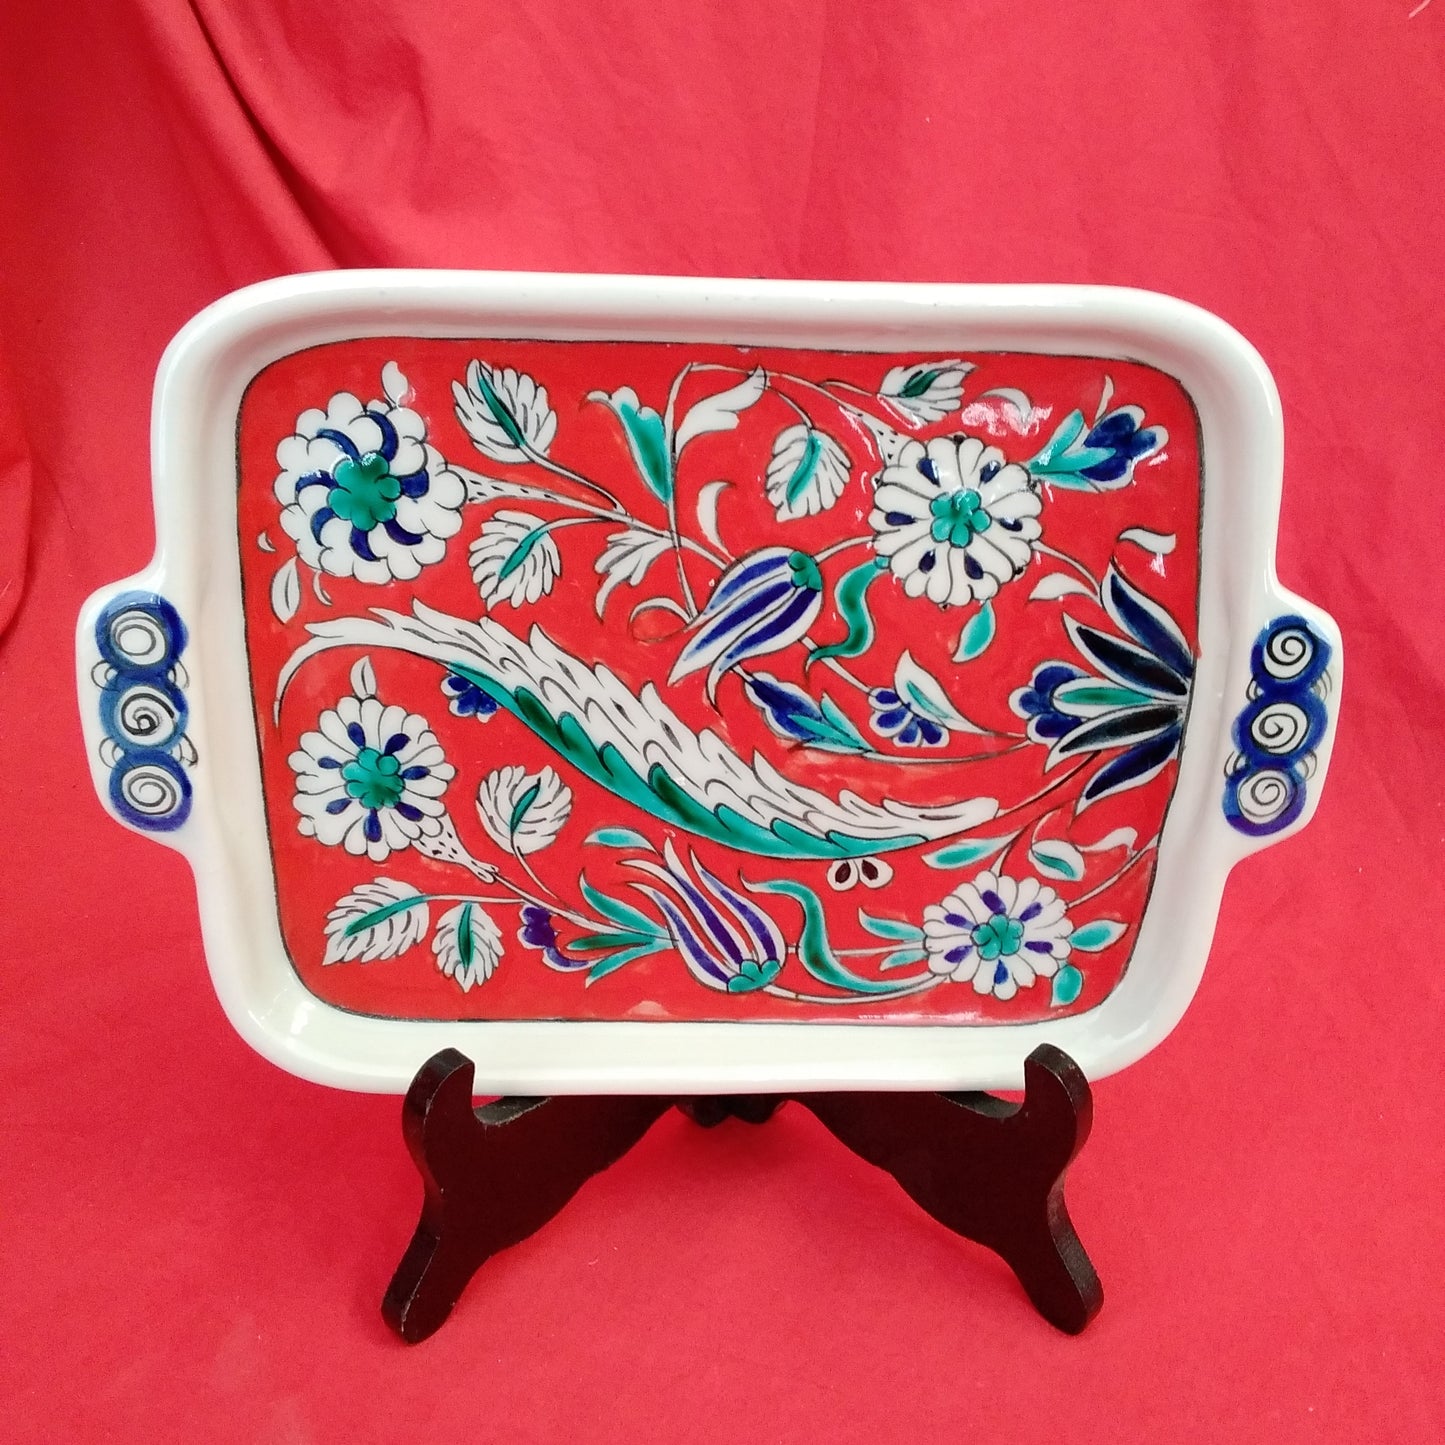 Red Iznik Tray Signed by Meliha Coskun 2013